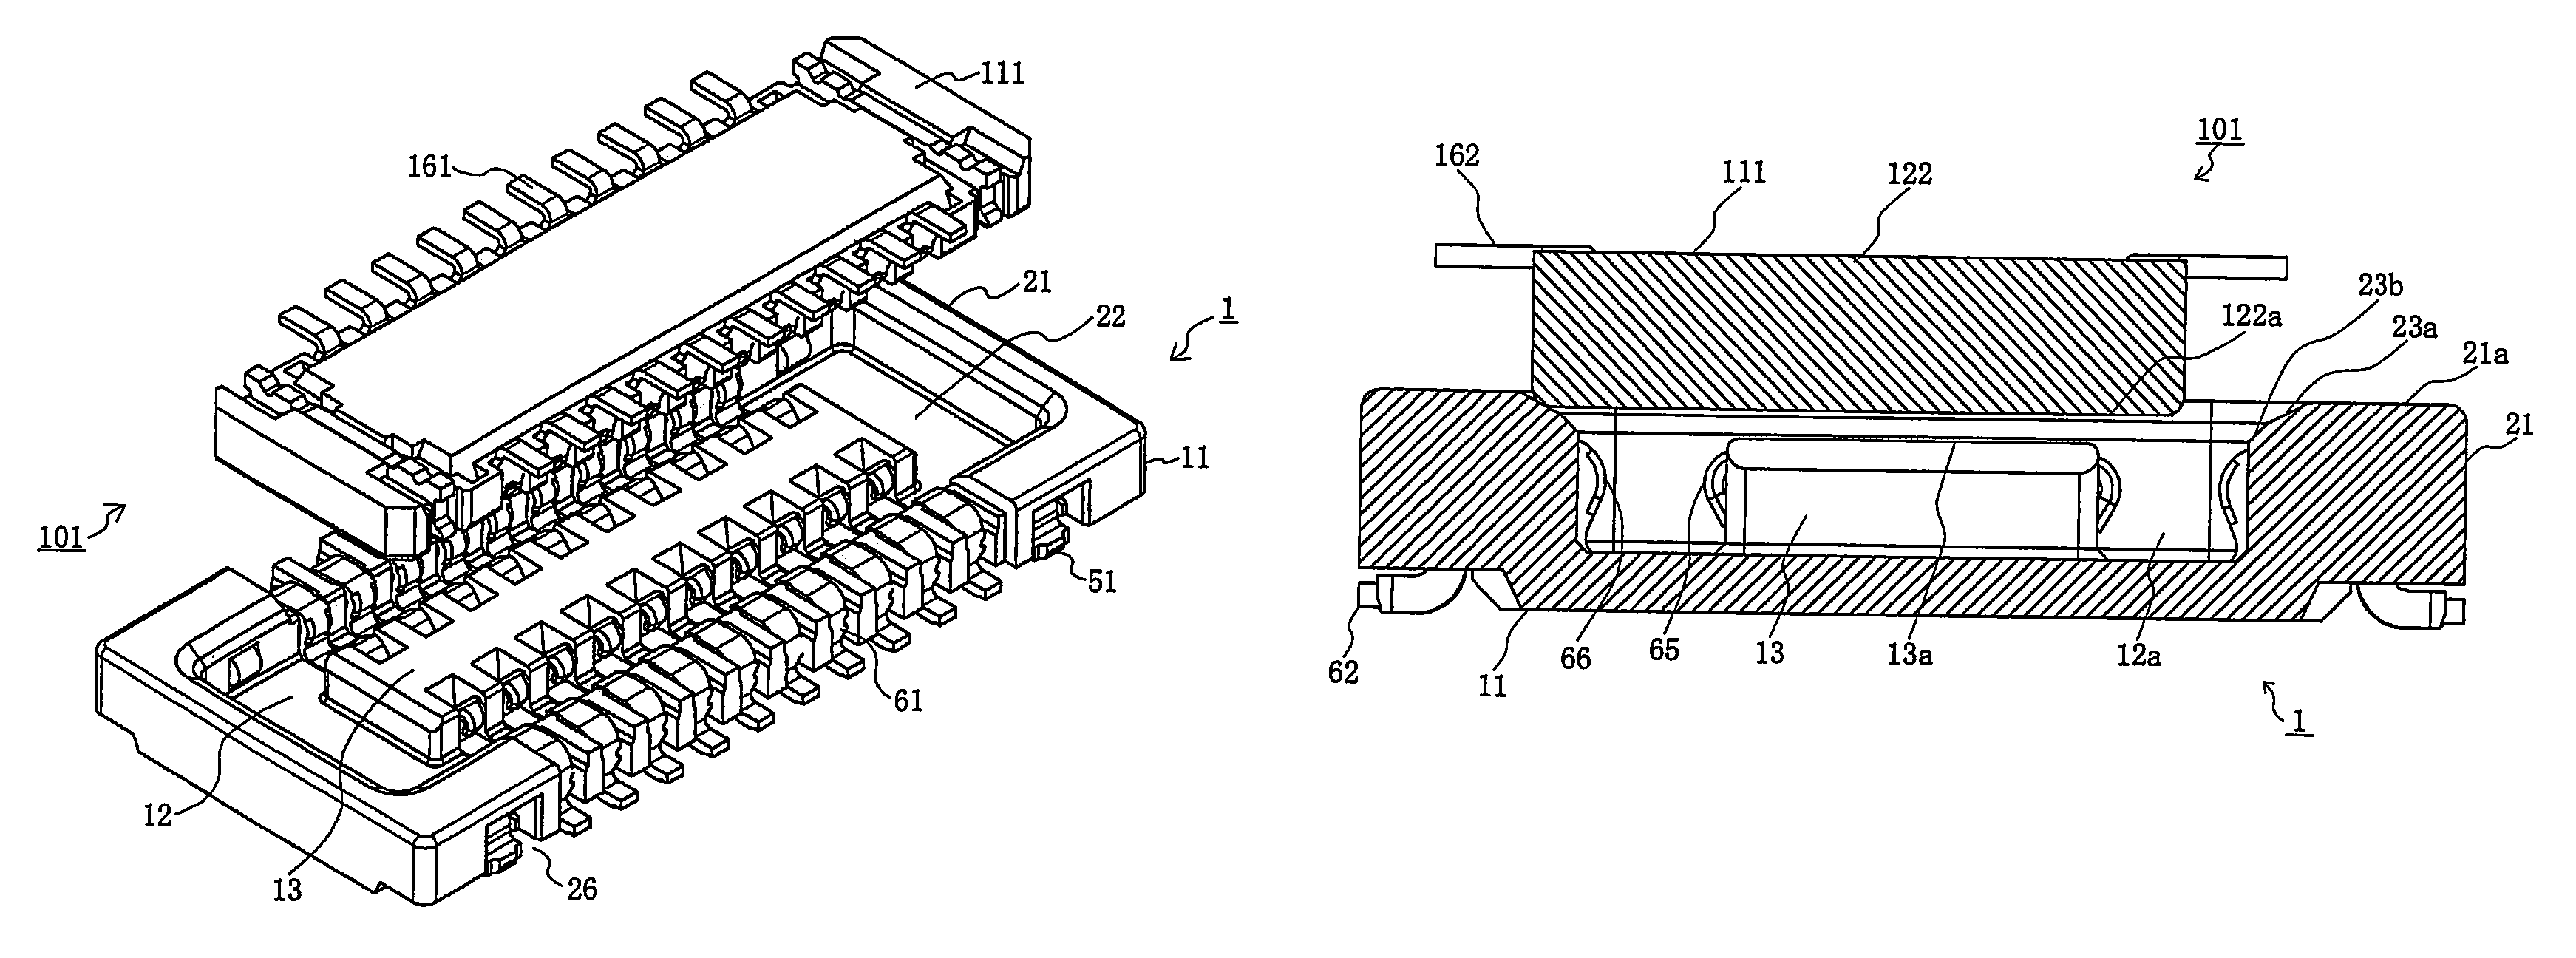 Board-to-board connector having sloped guide surfaces with a common edge